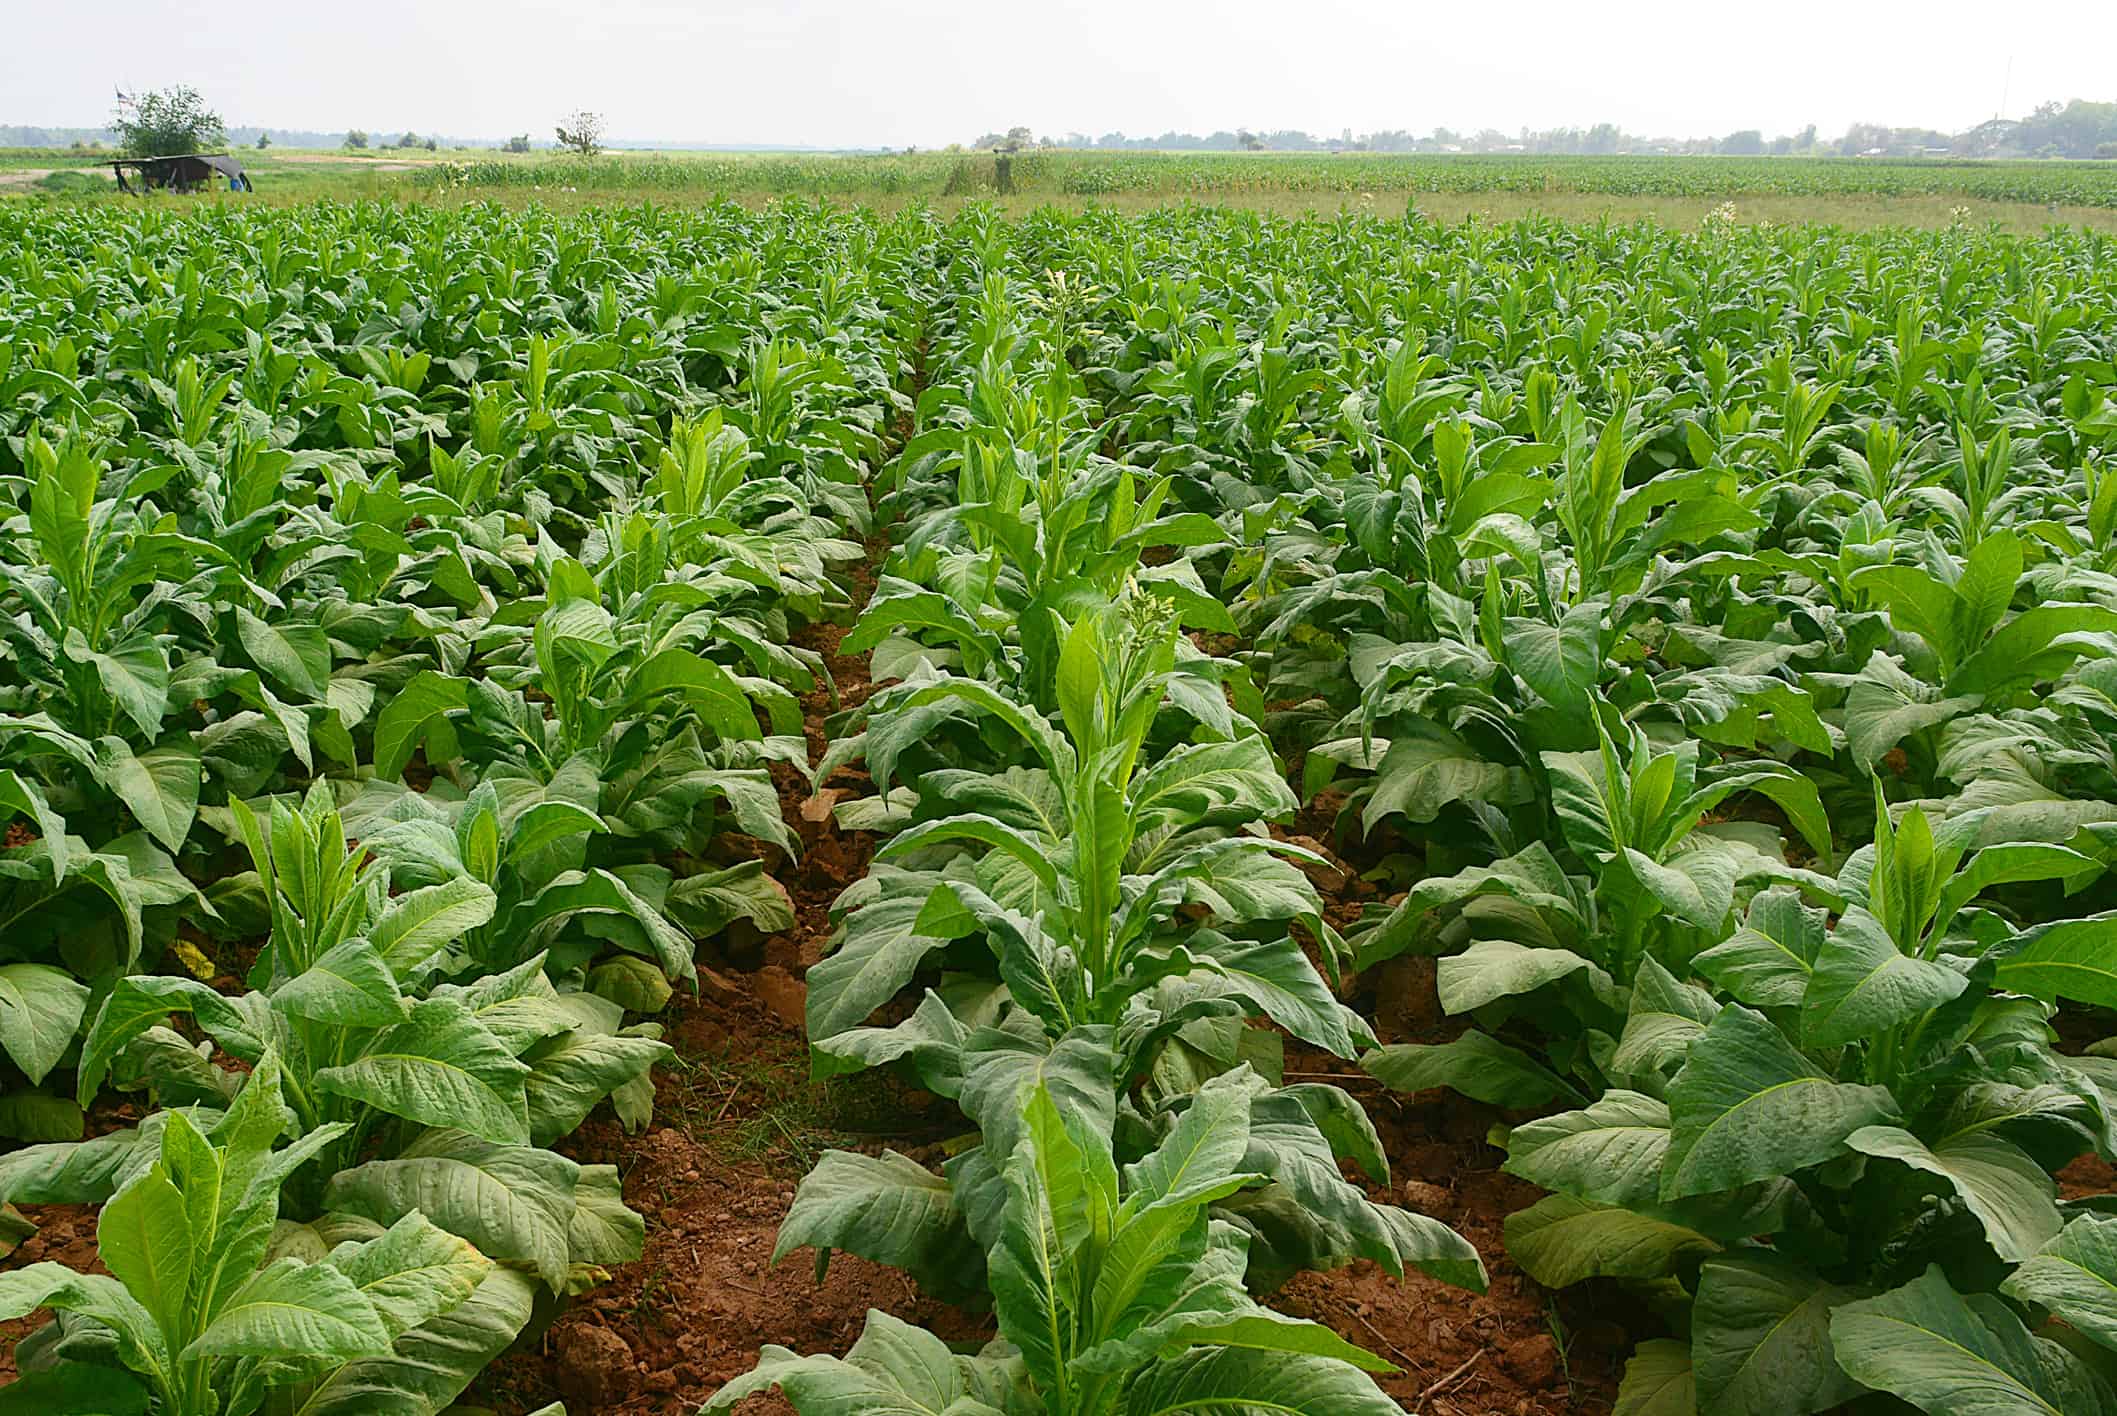 Thousands of Immature (green) true tobacco plants growing in straight rows in a cultivated field